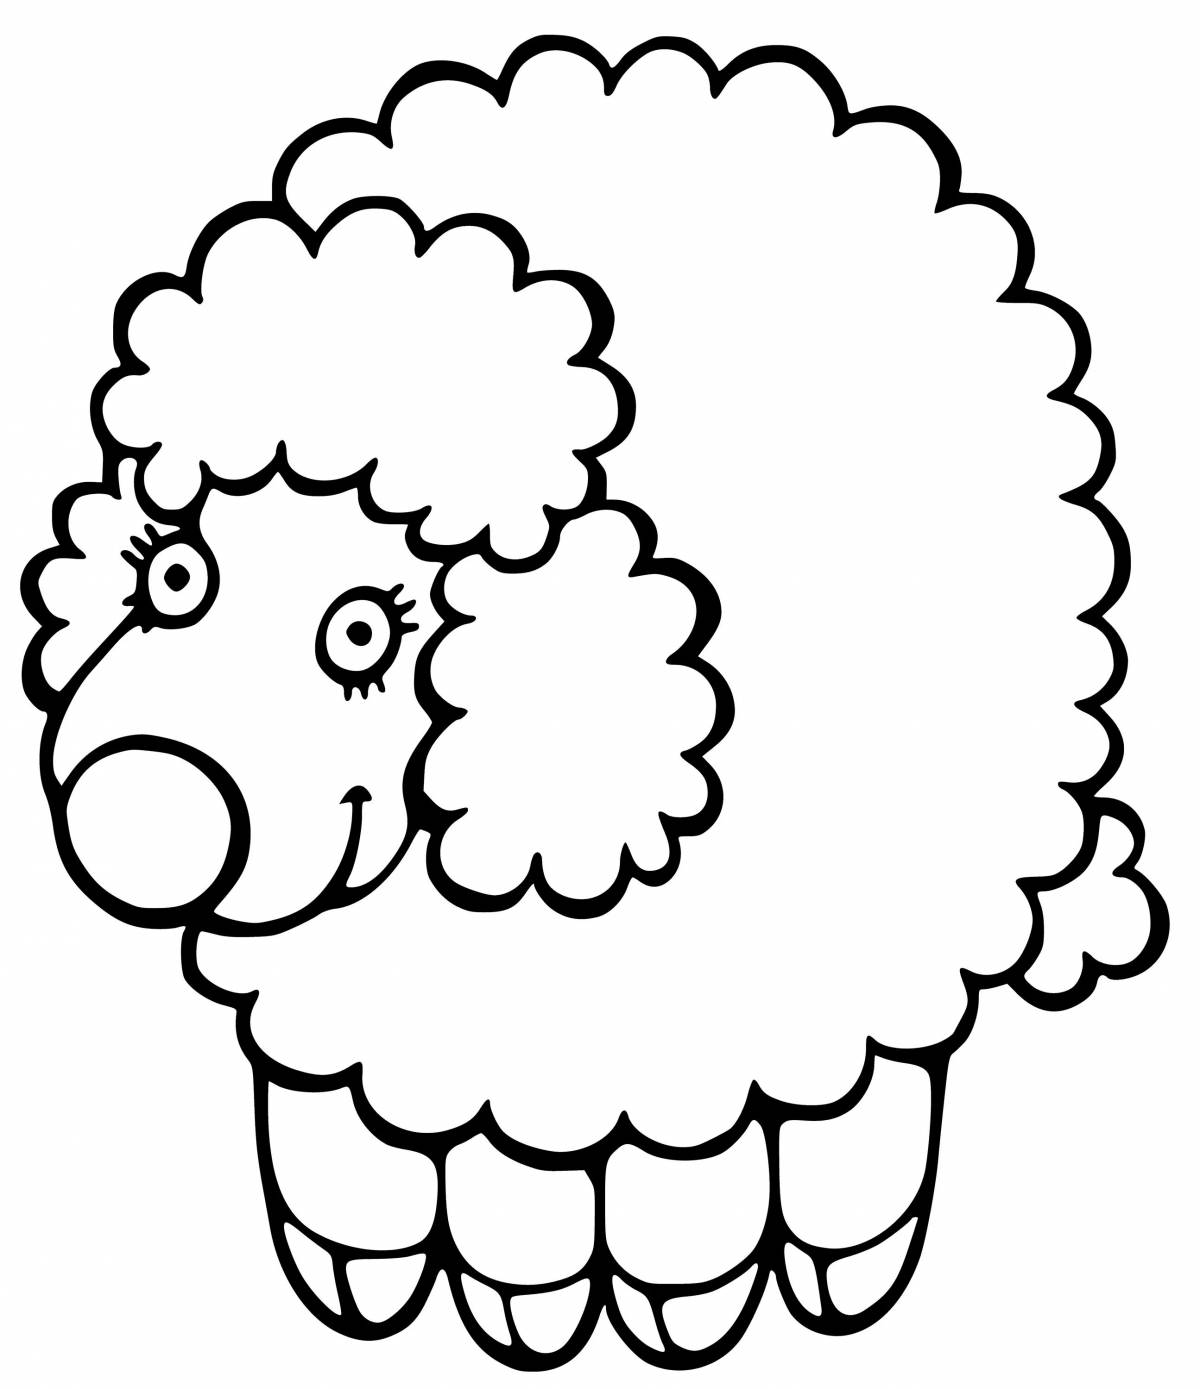 Naughty sheep coloring book for children 2-3 years old